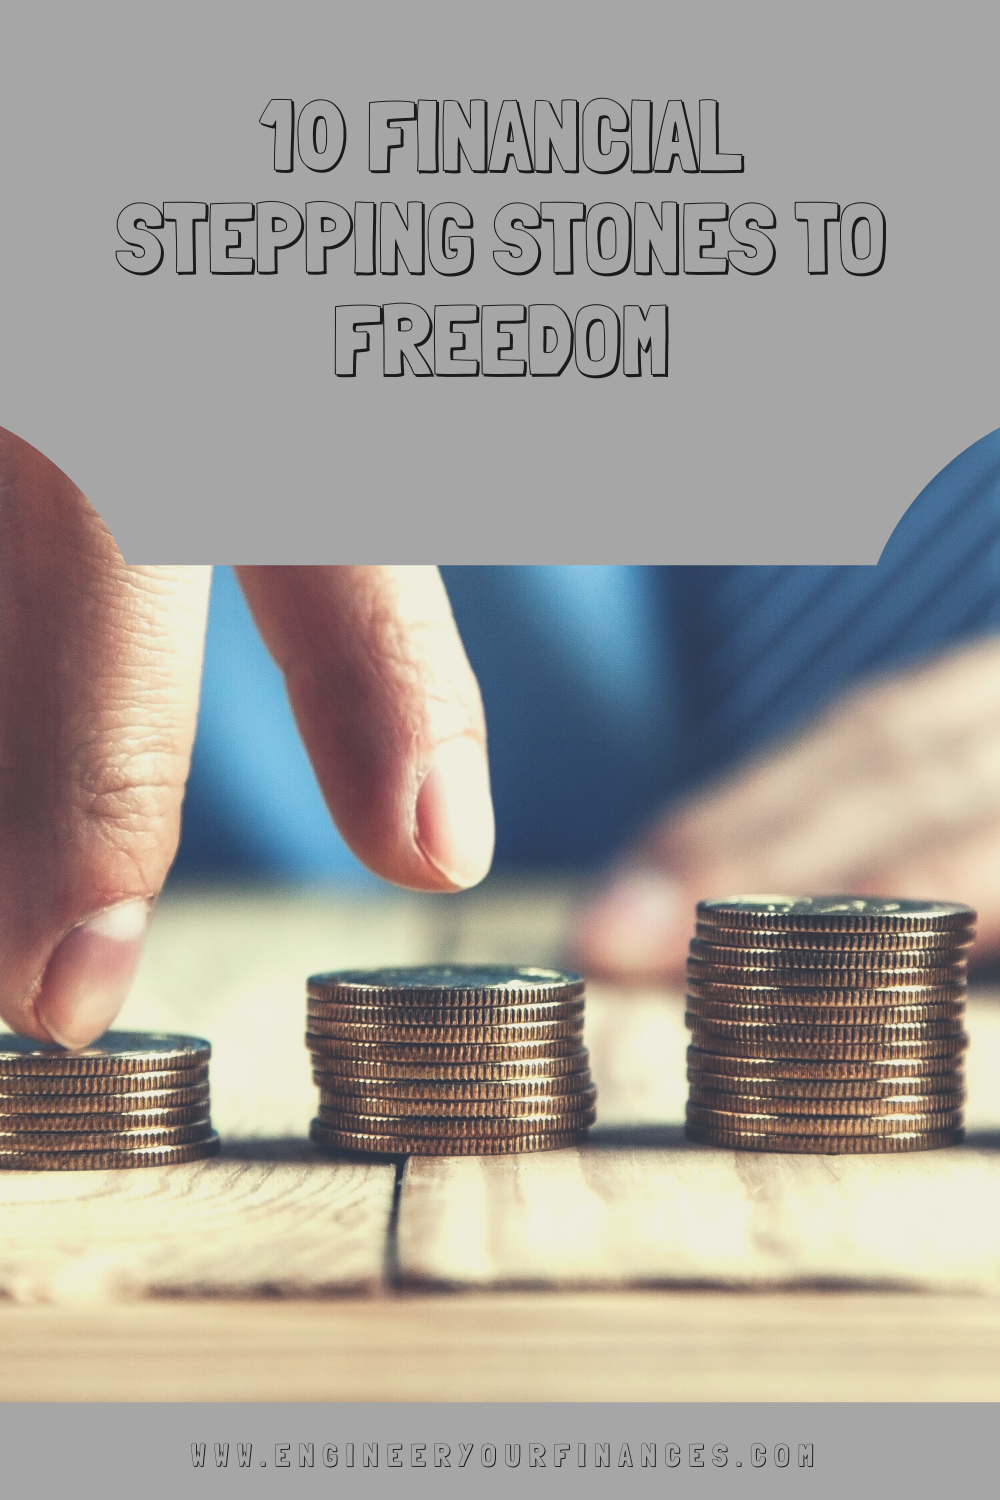 10 Financial Stepping Stones to Freedom